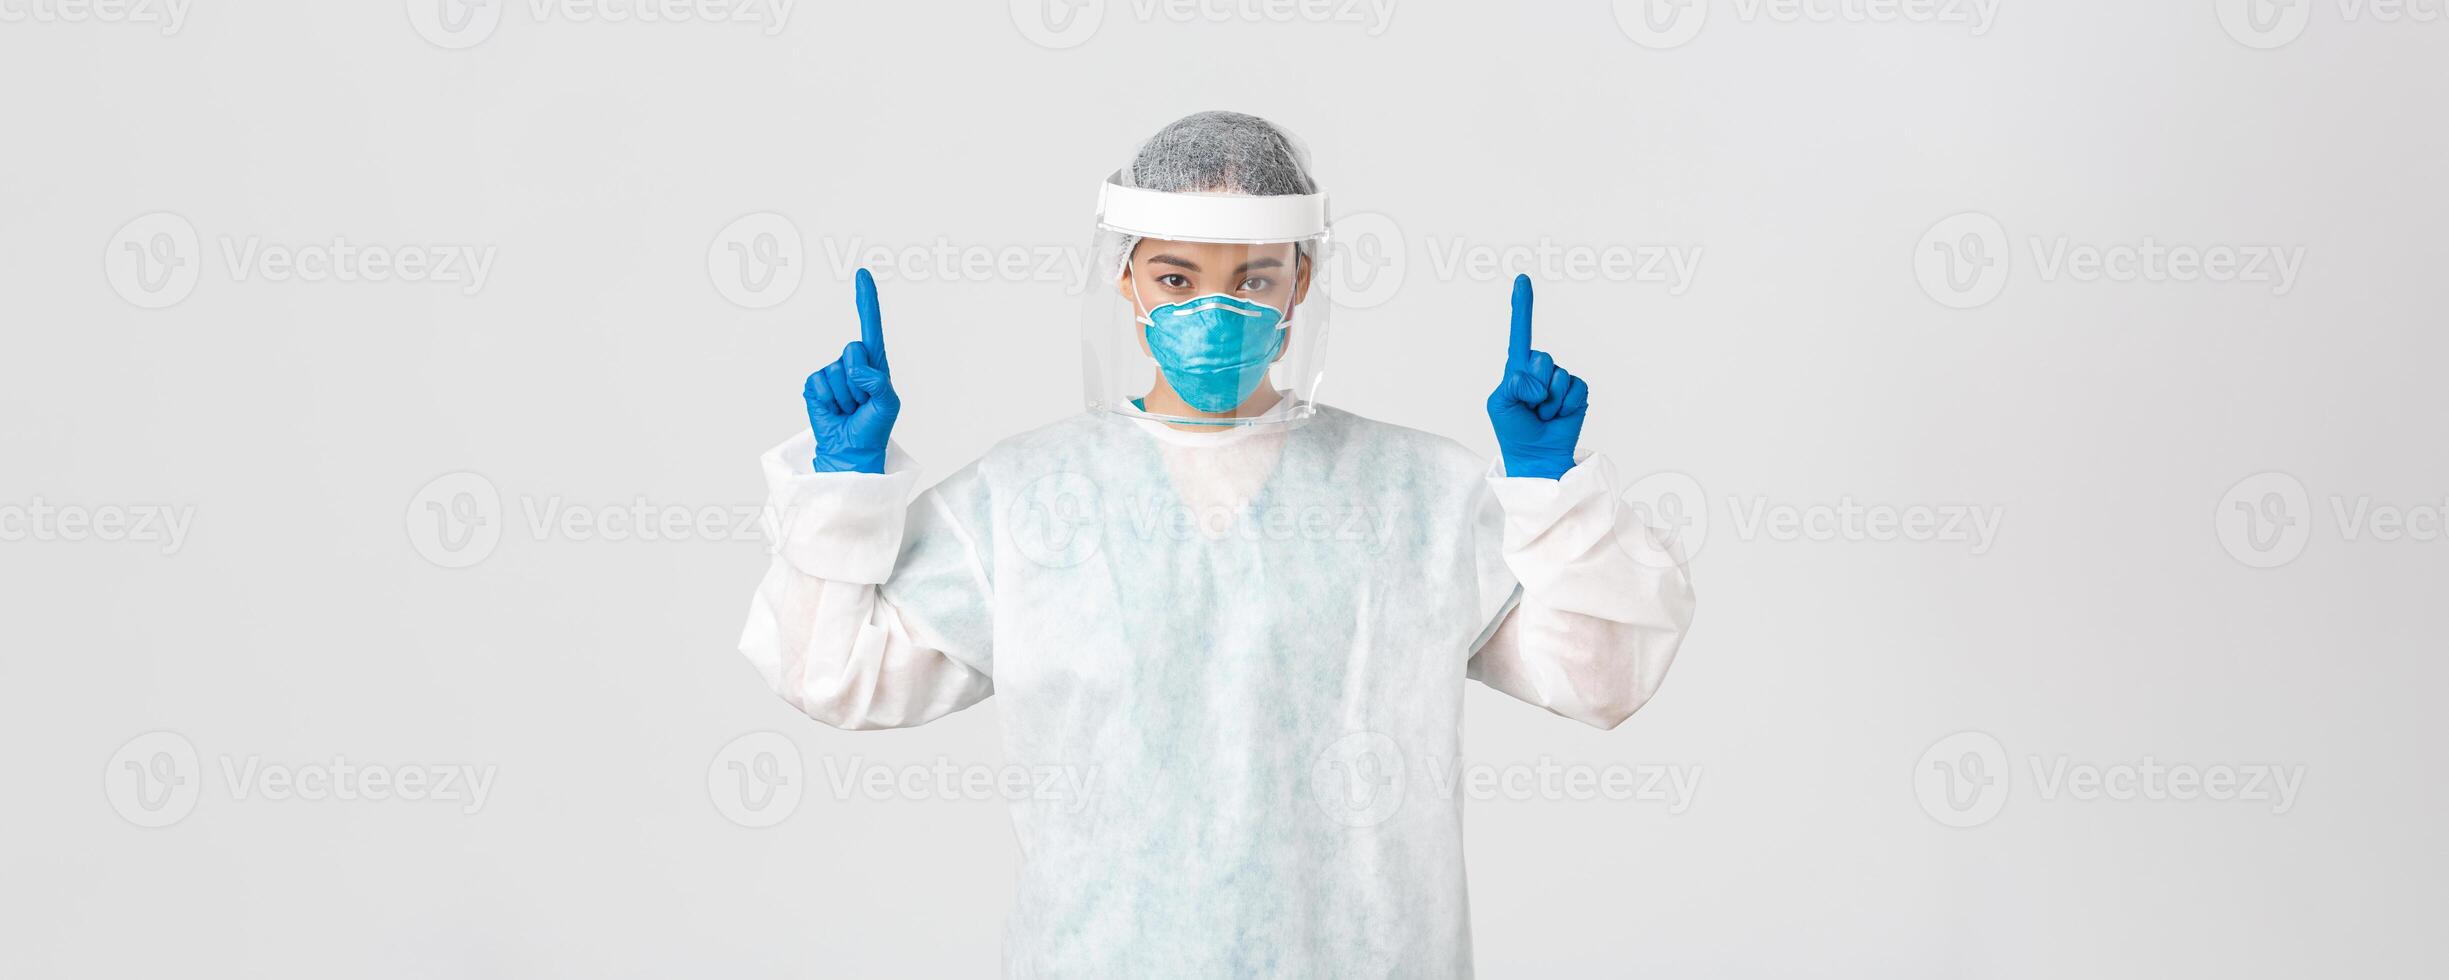 Covid-19, coronavirus disease, healthcare workers concept. Serious-looking young asian female doctor, tech lab employee in respirator and personal protective equipment, white background photo